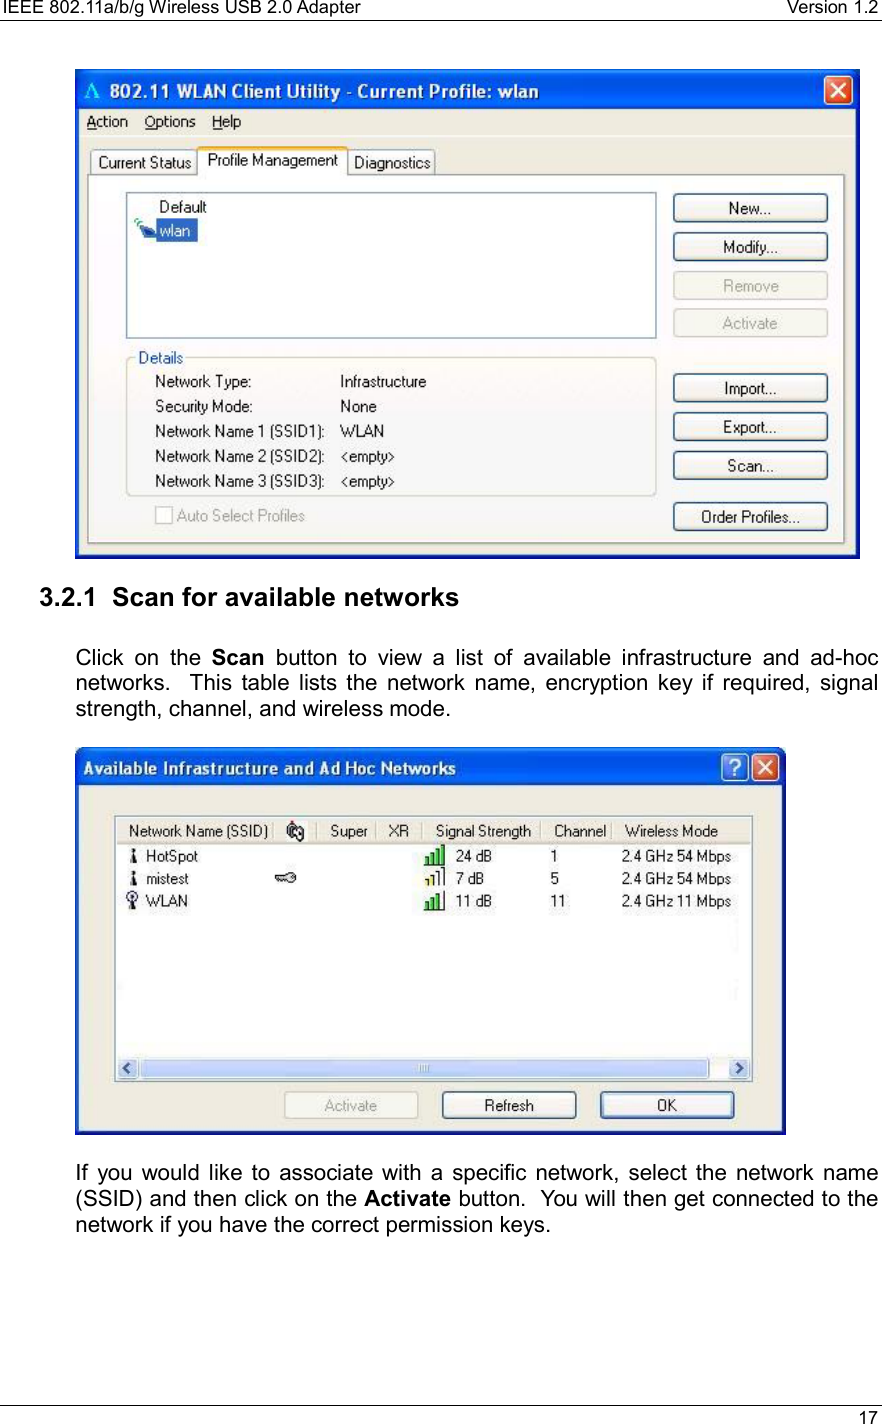 IEEE 802.11a/b/g Wireless USB 2.0 Adapter    Version 1.2   17   3.2.1 Scan for available networks  Click on the Scan button to view a list of available infrastructure and ad-hoc networks.  This table lists the network name, encryption key if required, signal strength, channel, and wireless mode.      If you would like to associate with a specific network, select the network name (SSID) and then click on the Activate button.  You will then get connected to the network if you have the correct permission keys.    